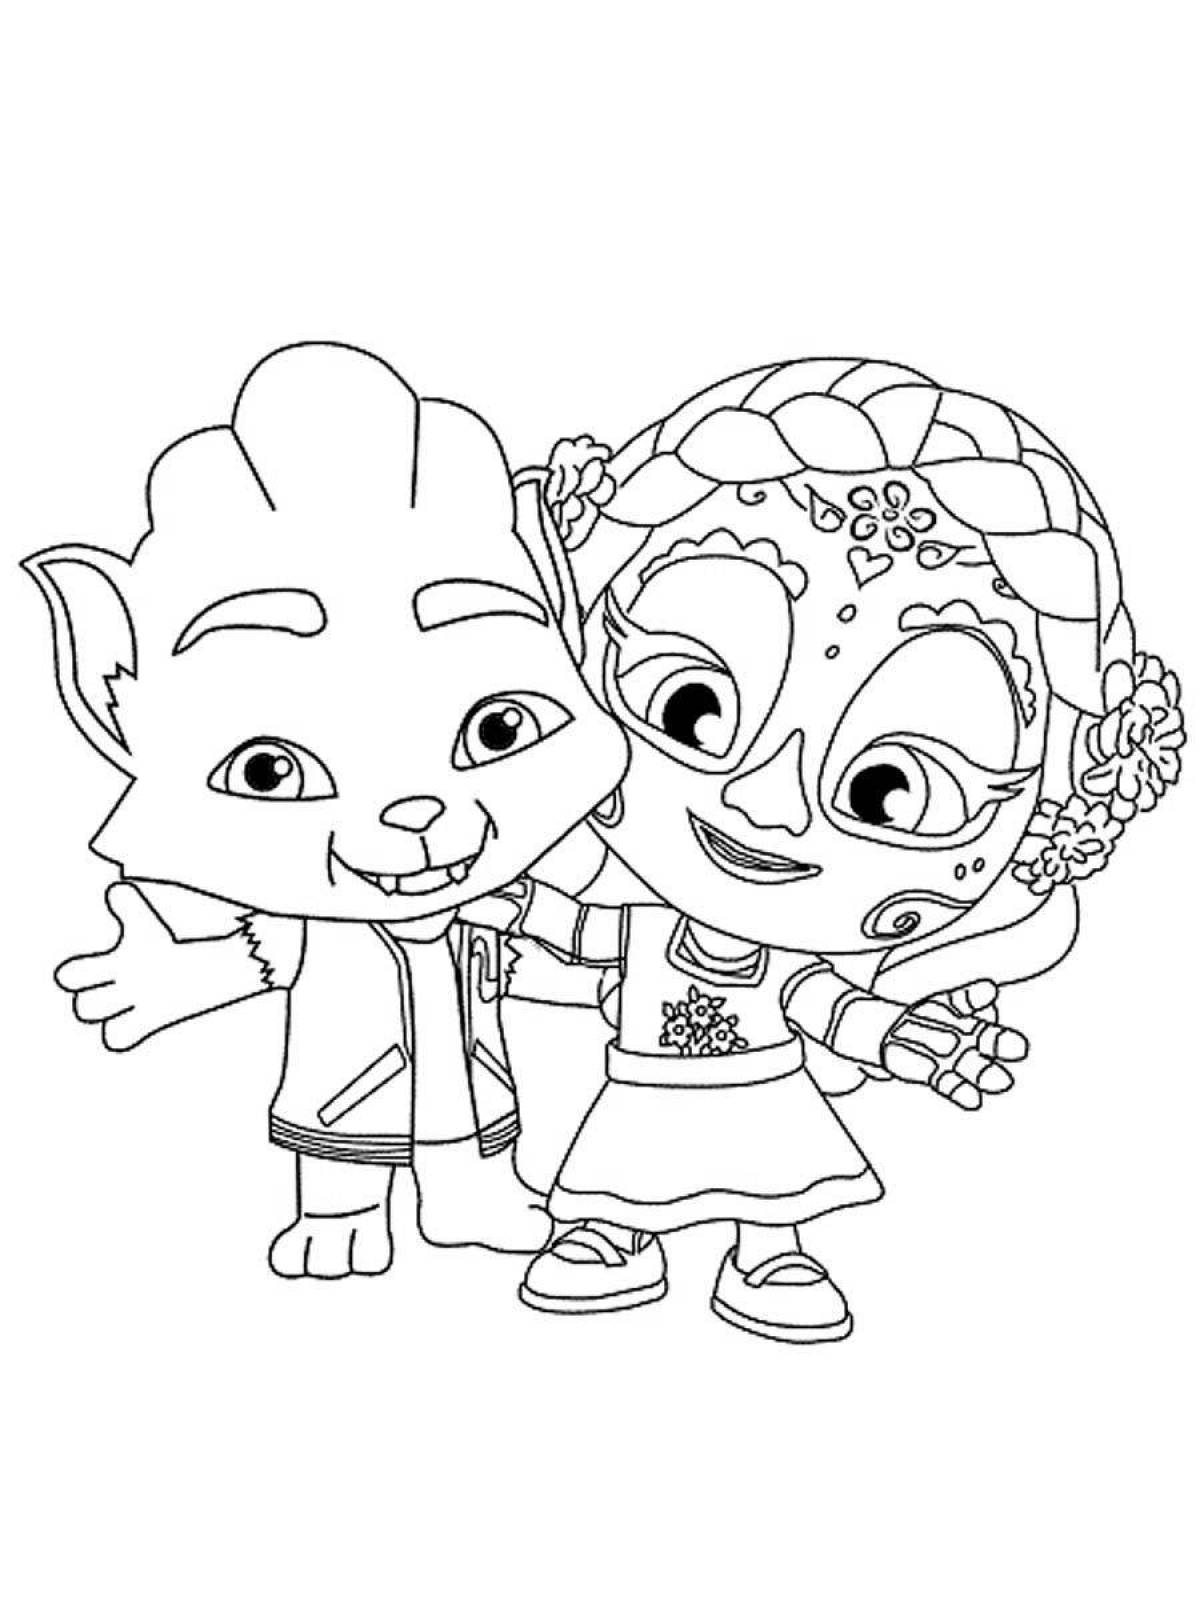 Fabulous coloring pages super monsters